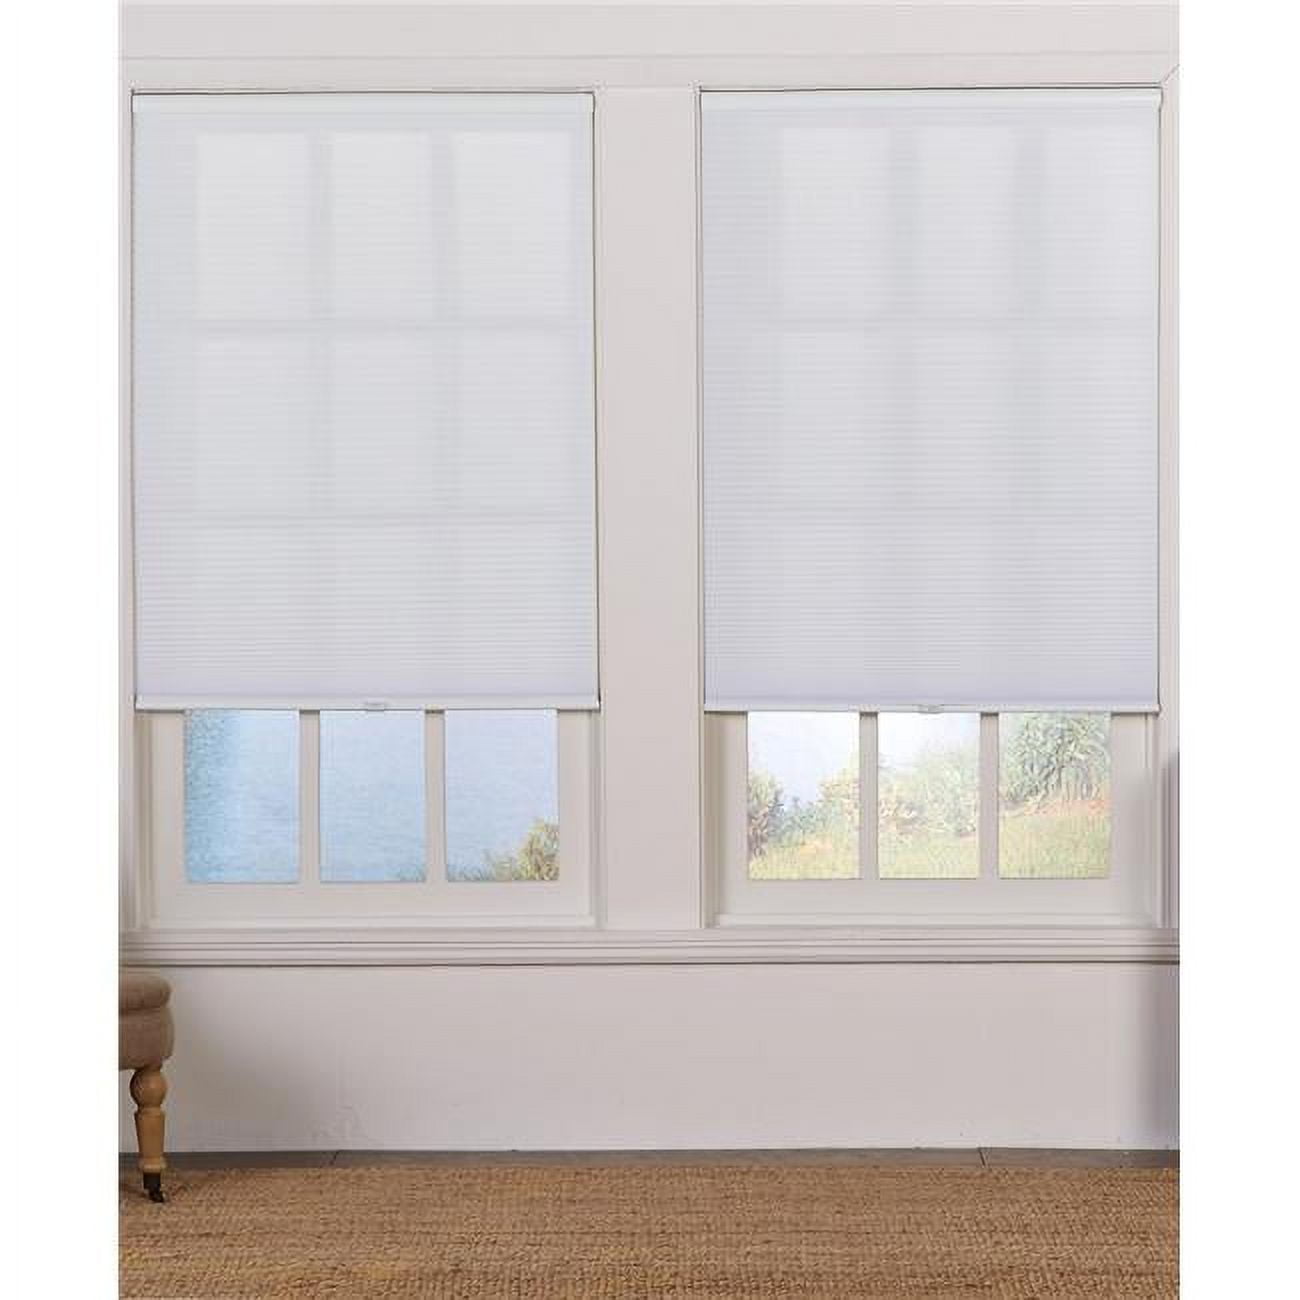 Ubc29x48wt Cordless Light Filtering Cellular Shade, White - 29 X 48 In.